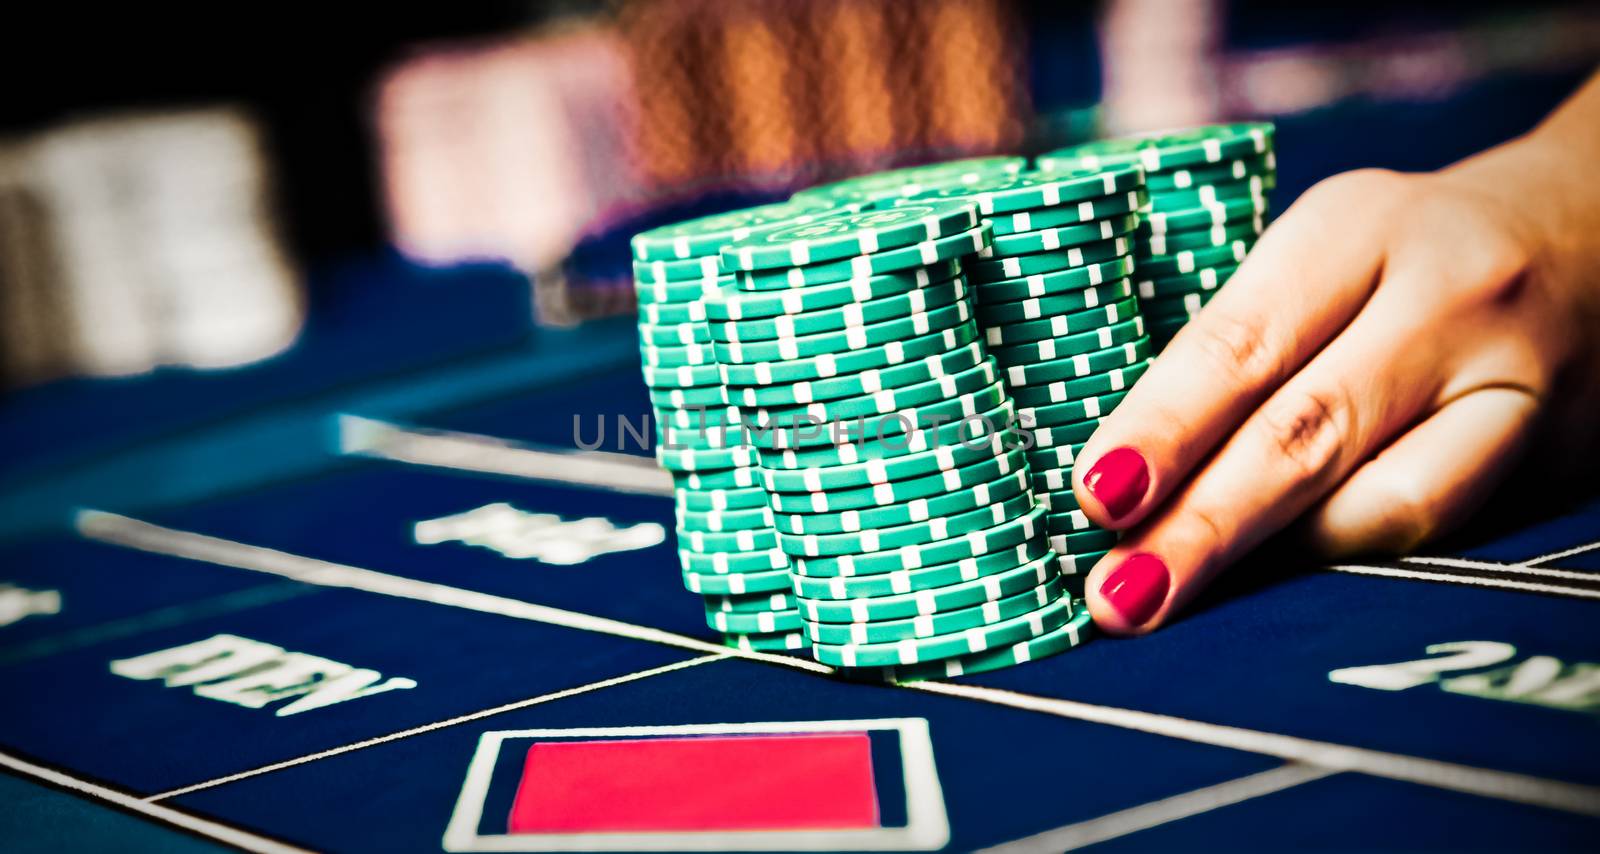 Betting and playing roulette in casino, gambling ads